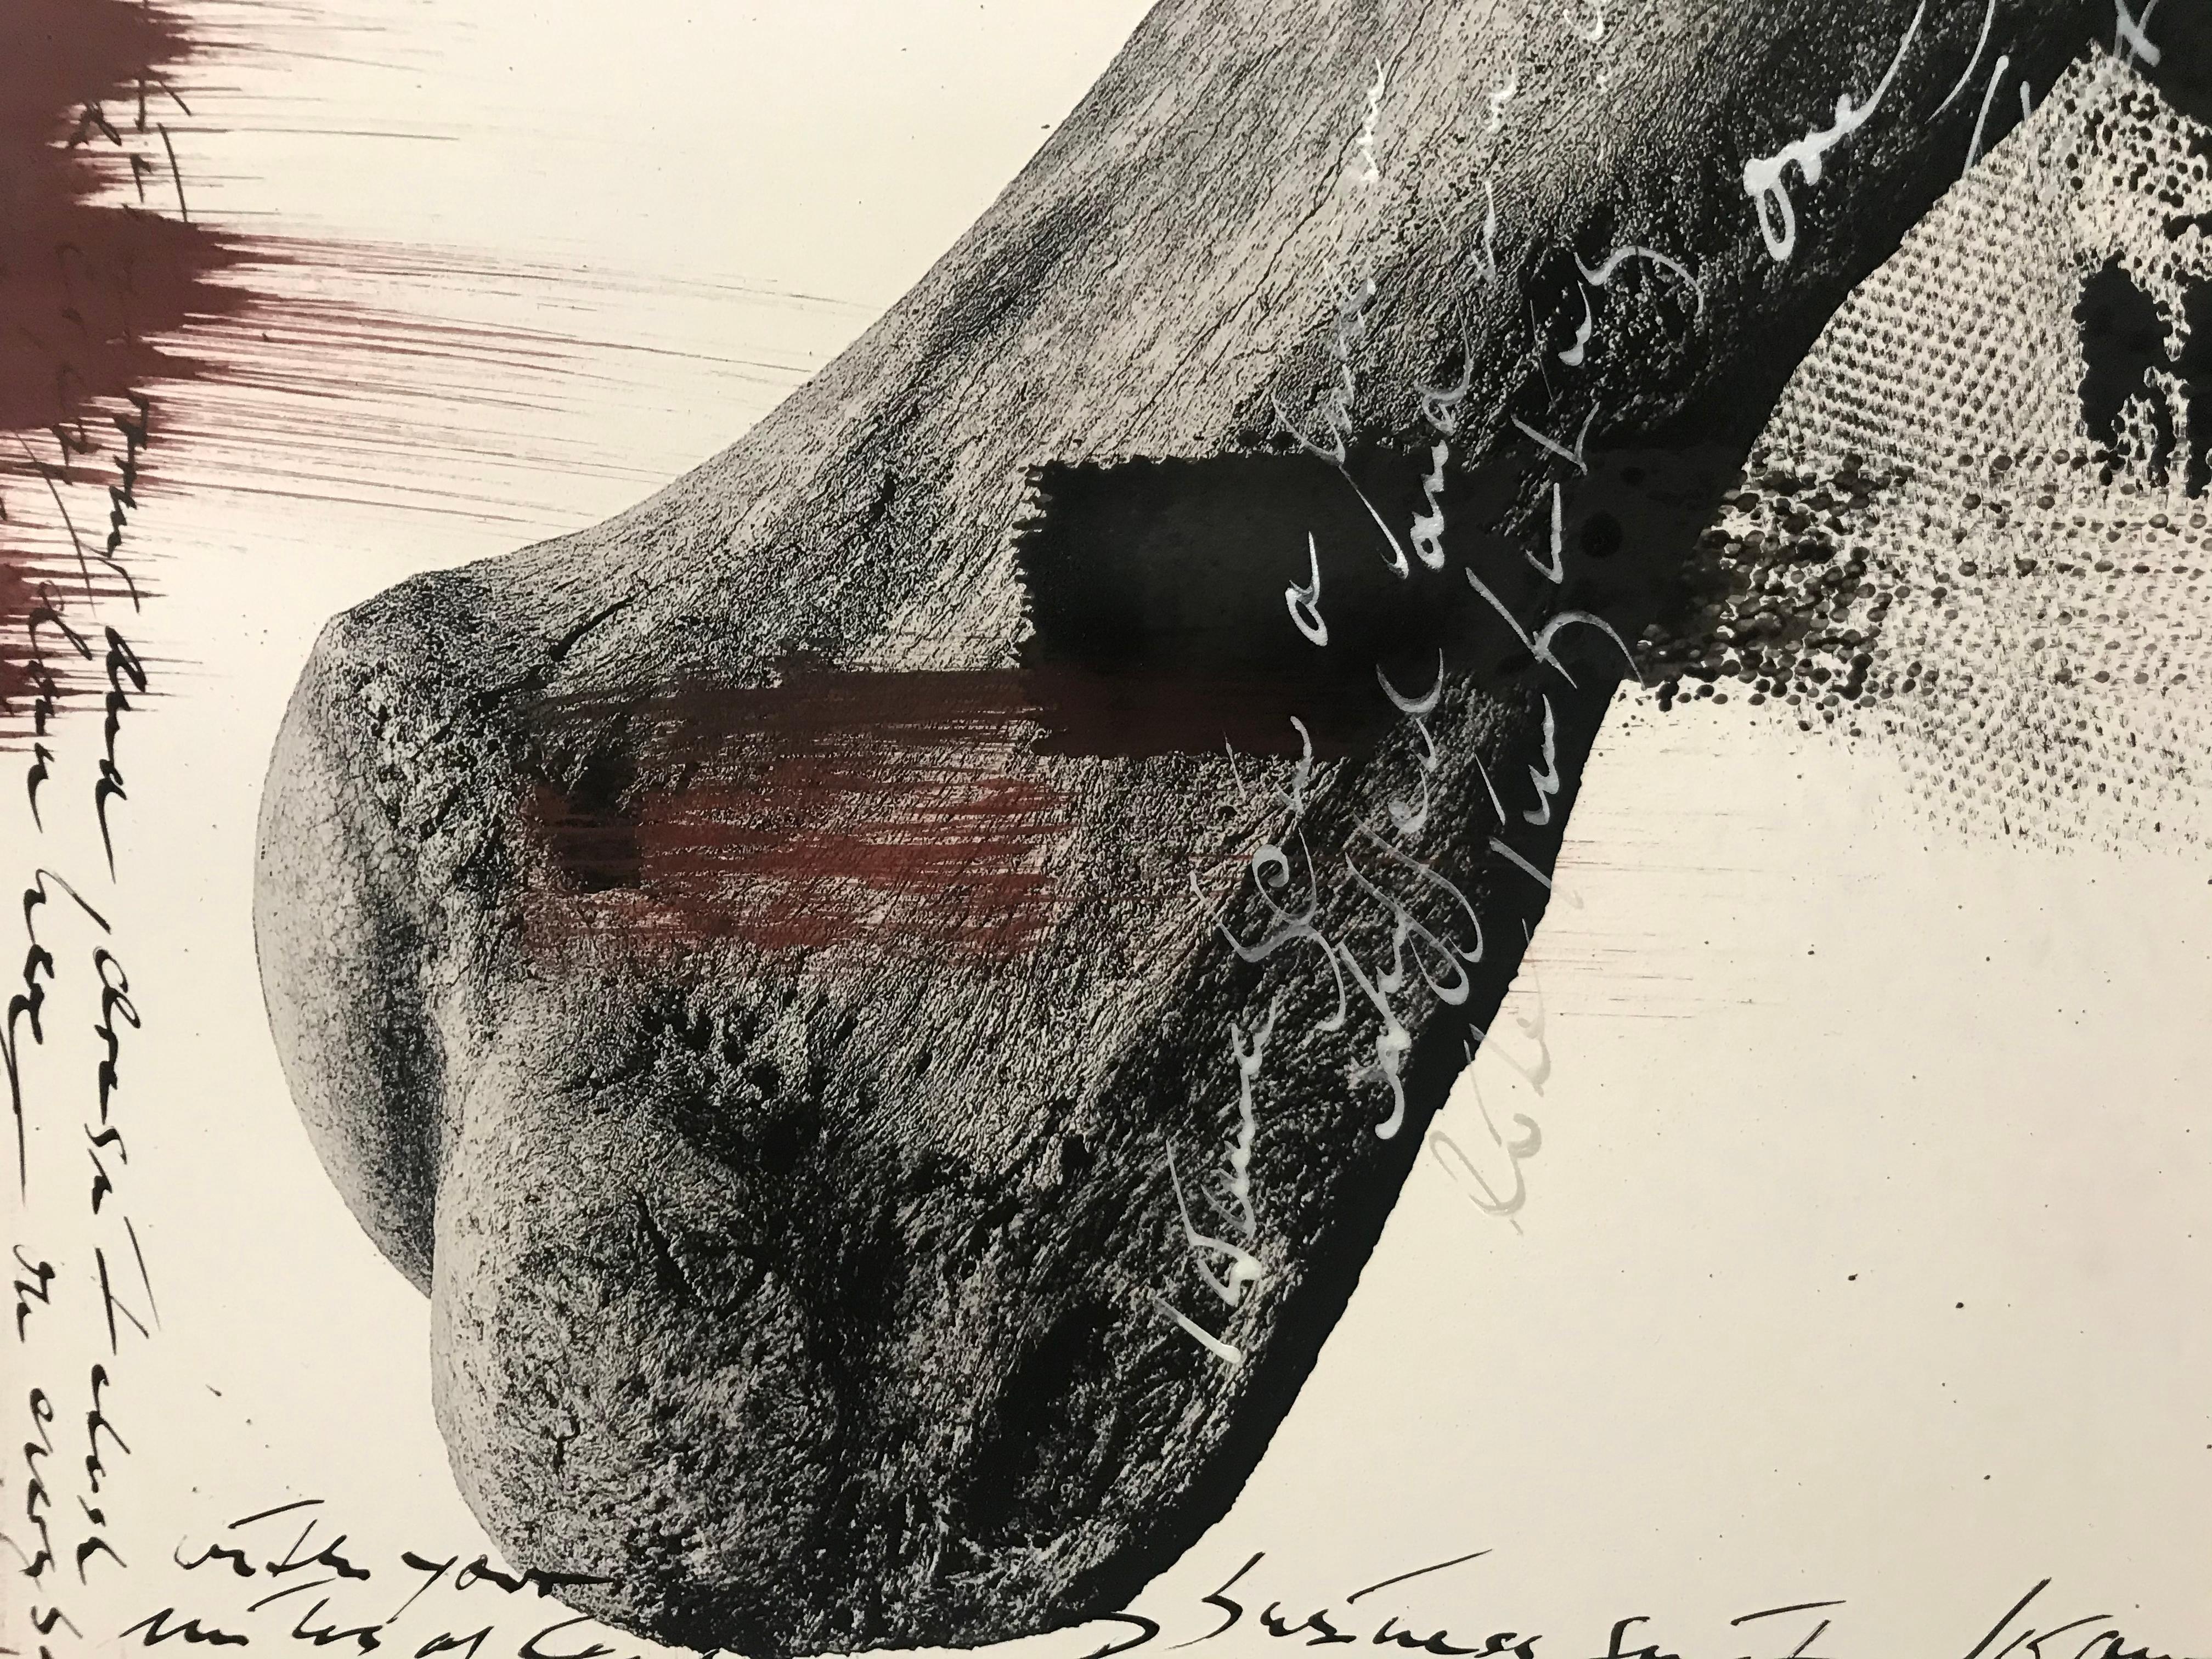 Unique Piece / One of a Kind

2 Elephant thighbones. Museum Archival Print on Hahnemühle Laid paper, Photography painted with Drawing Ink, Pigments. Handwritten Songtext by 